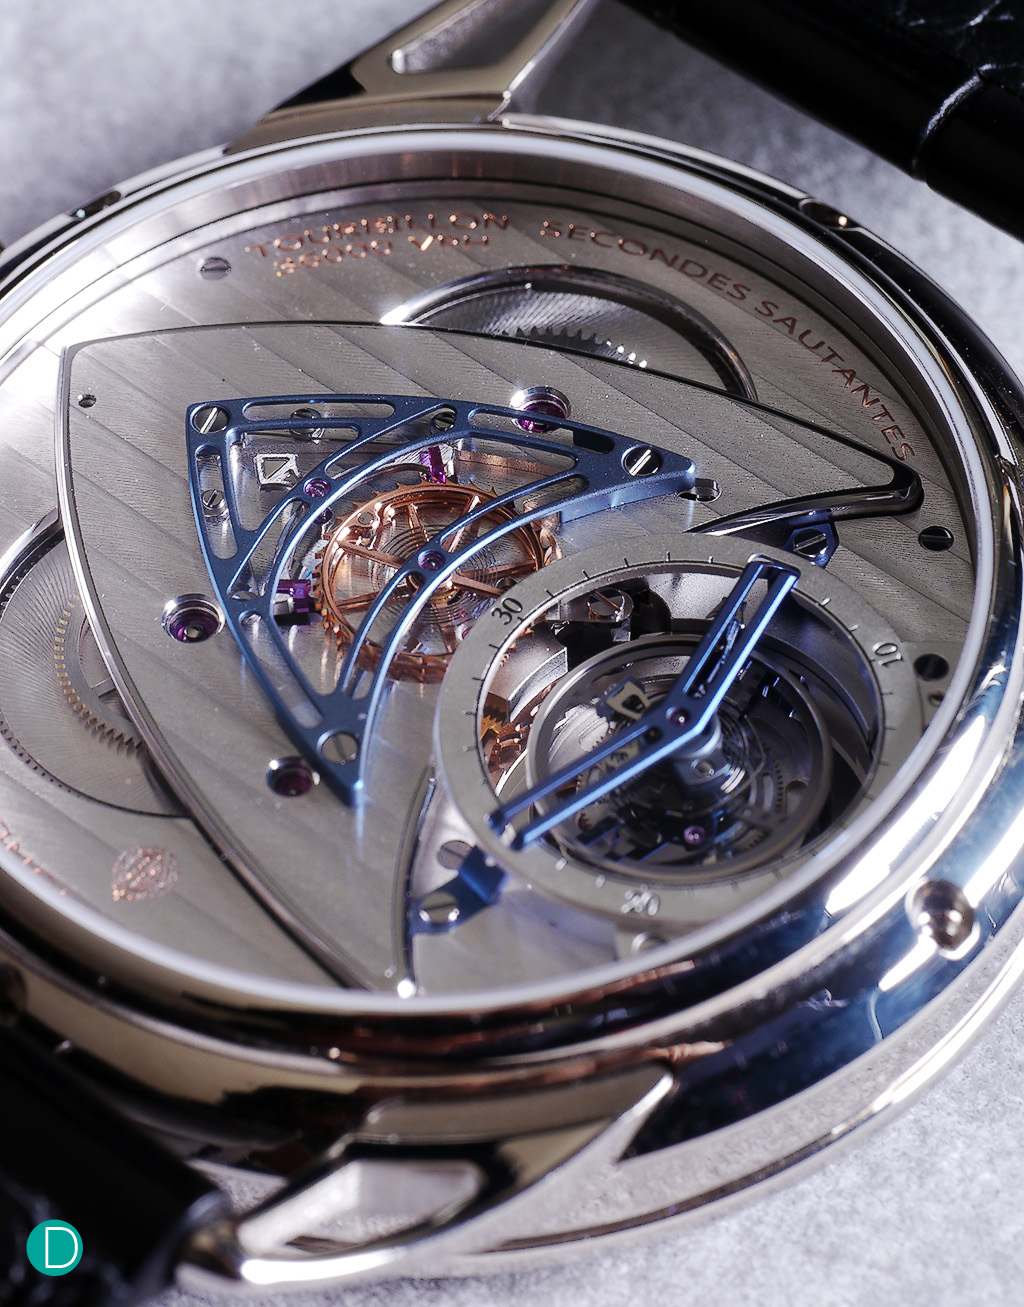 DB25T movement is the DB2019. Magnificently laid out to look like a shield, with blued titanium bridges holding the 30 second tourbillon and the jumping seconds wheel.